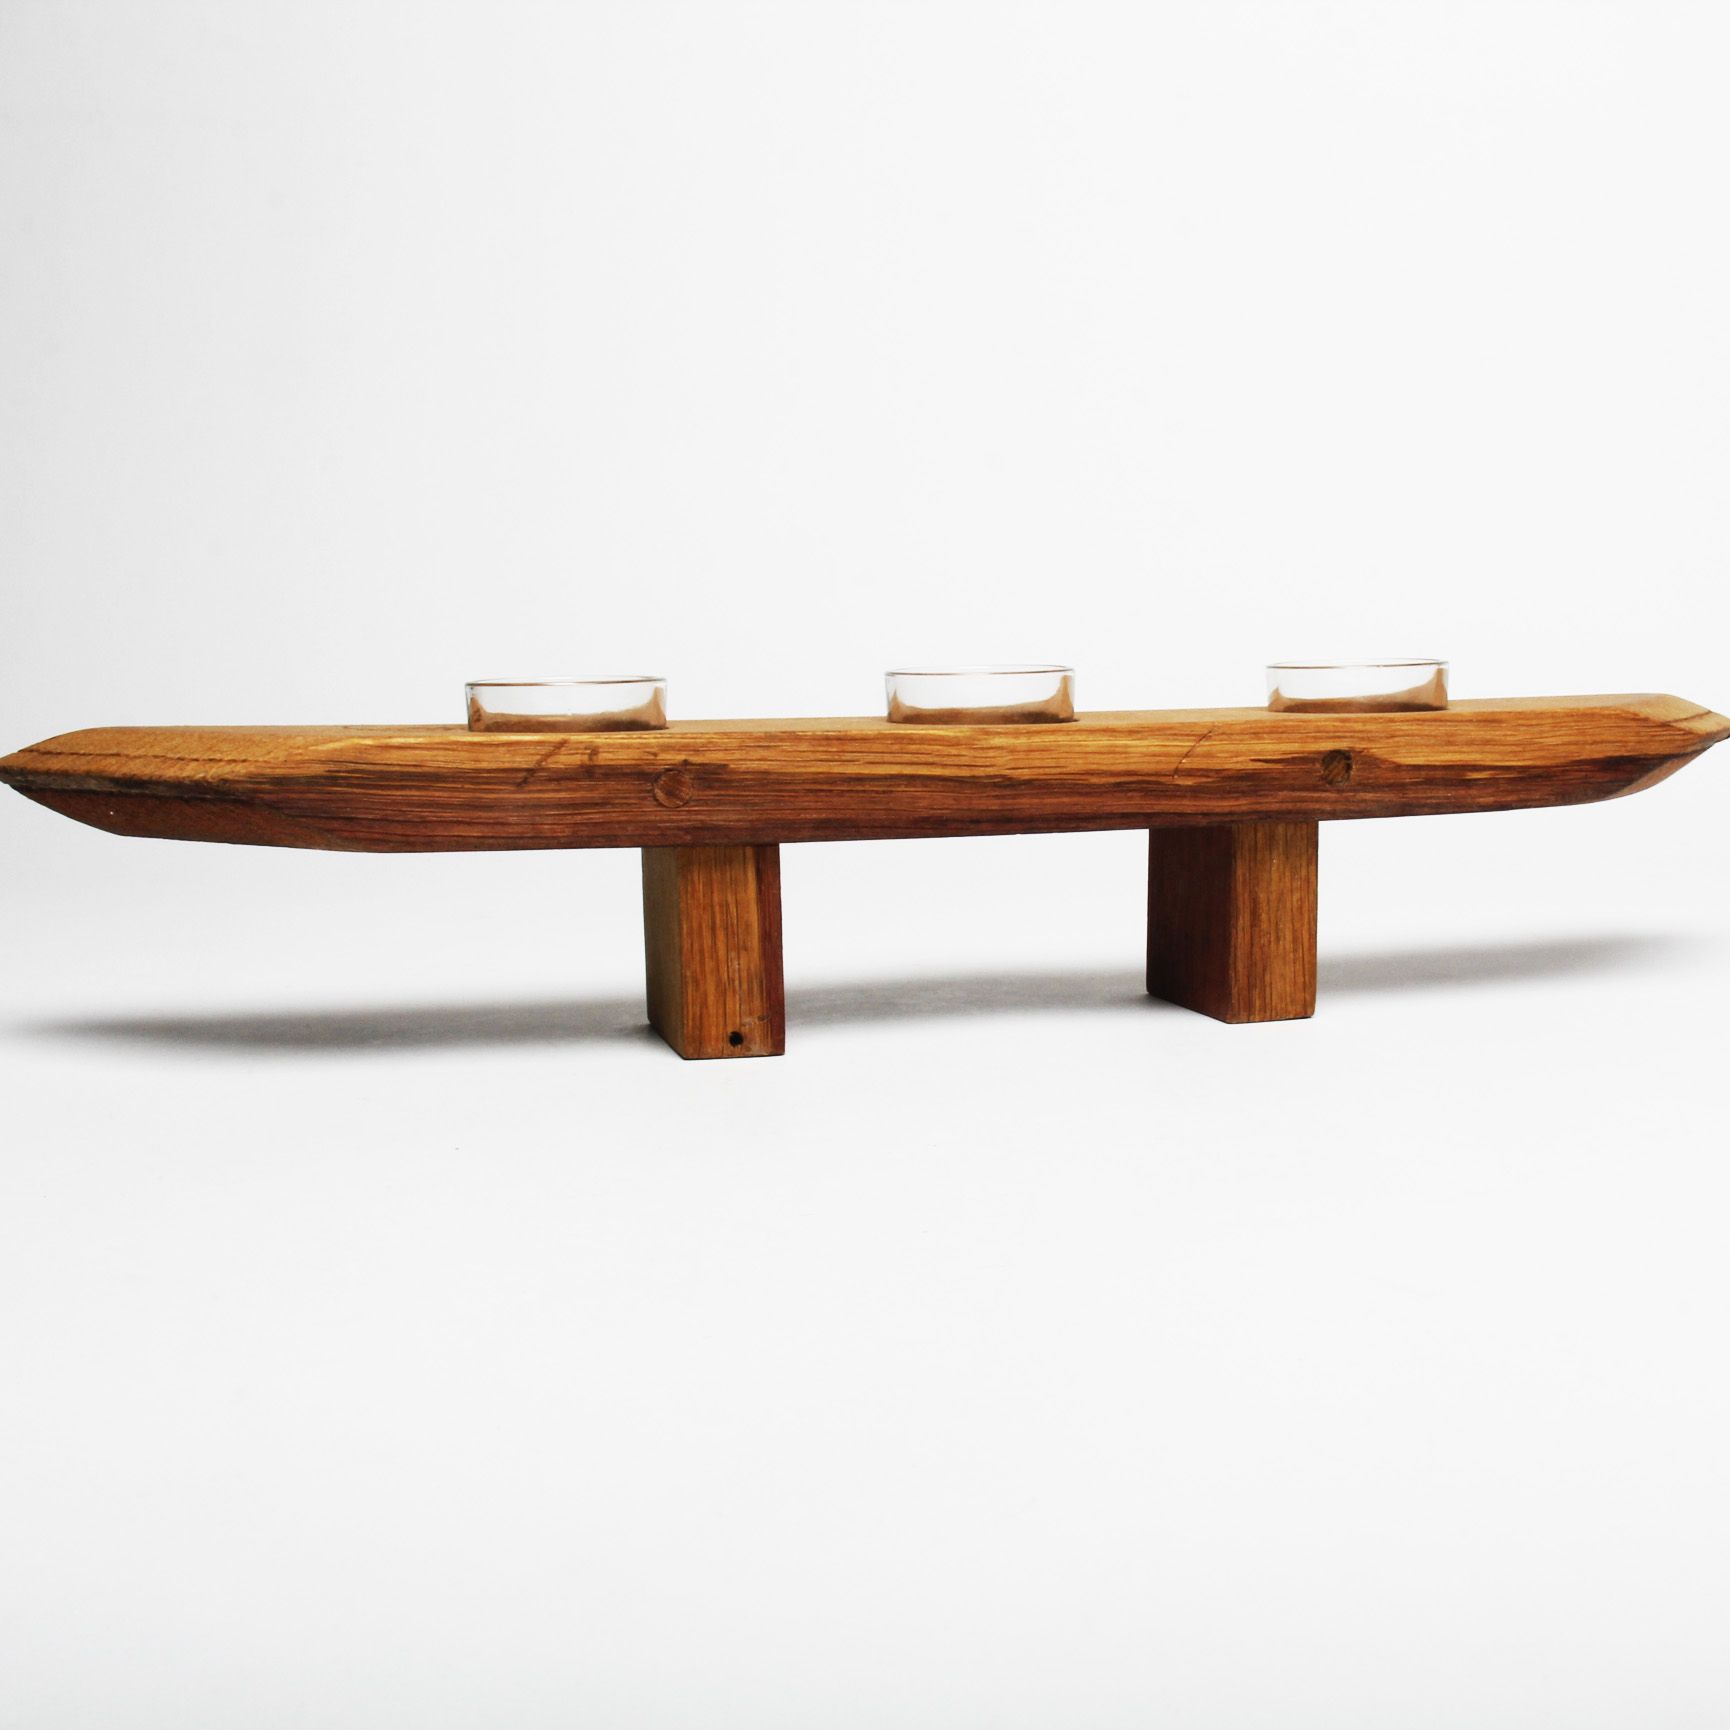 Wineplanks: Tealight with Legs Product Image 1 of 3